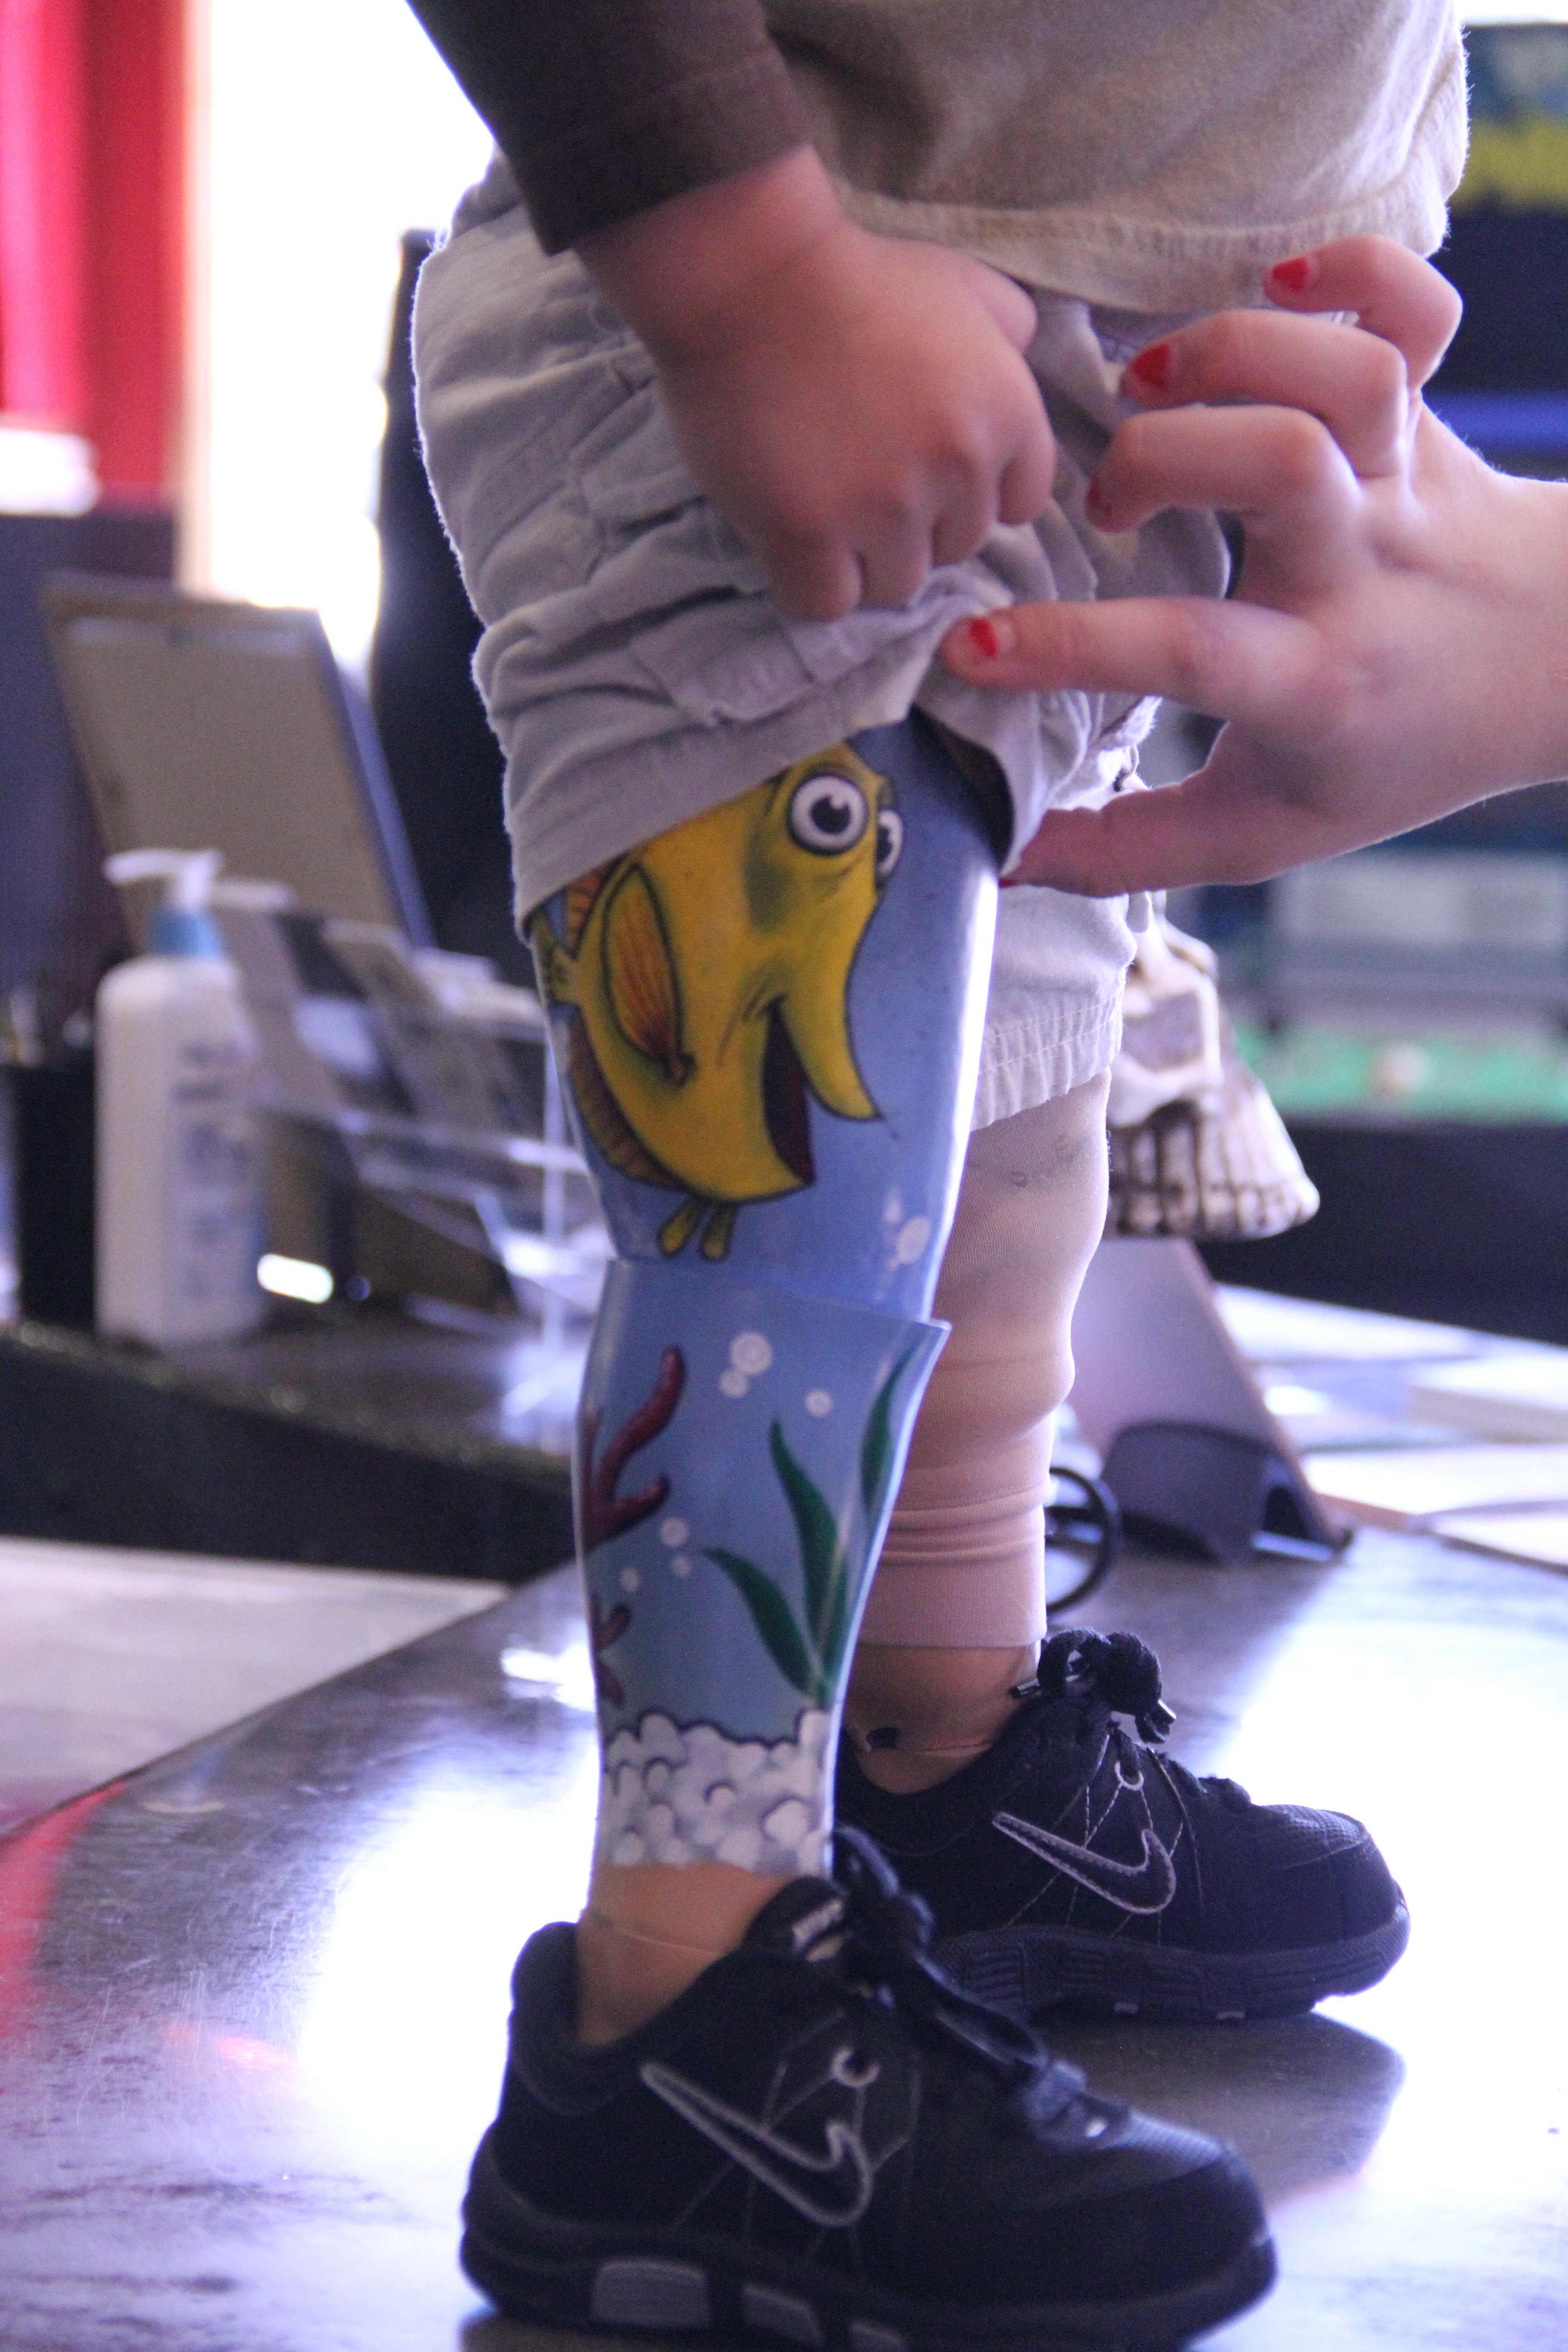 A tattoo artist buddy of mine just posted an update of the leg prosthetic  is is painting for a 2 year old boy That kid will have a leg sleeve at 2